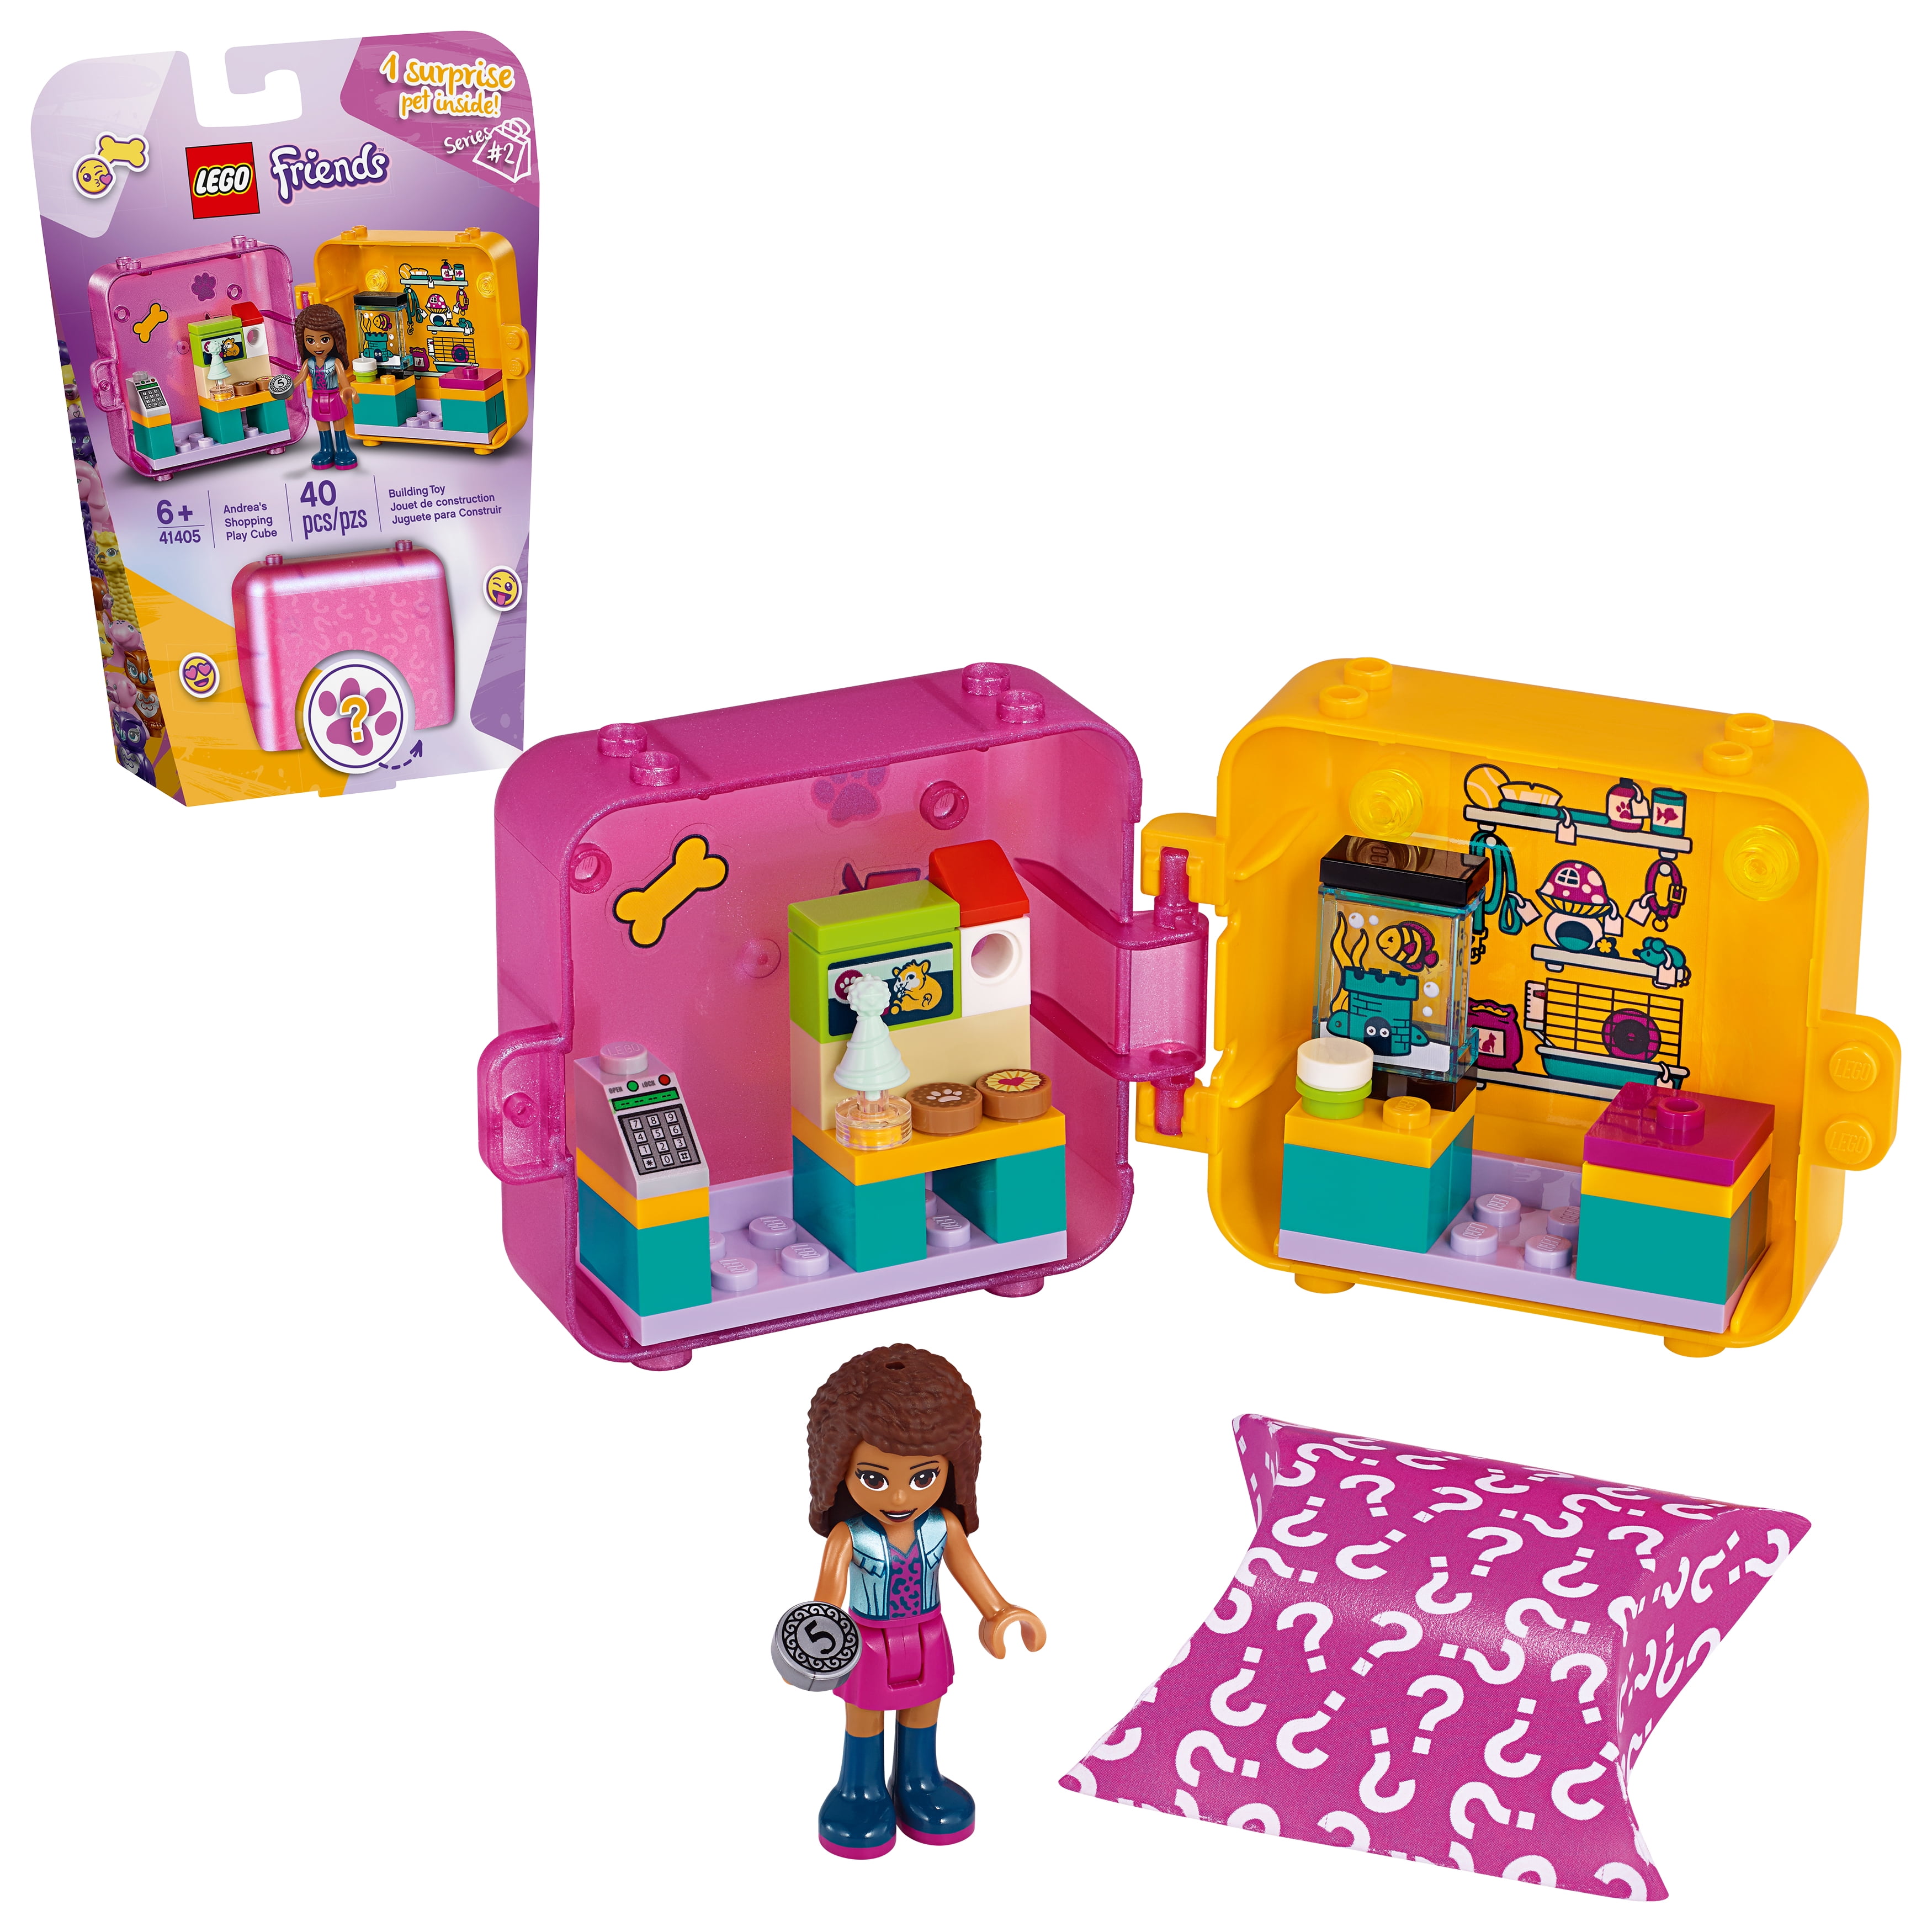 New 2020 Playset Includes Collectible Mini-Doll for Imaginative Play LEGO Friends Mia’s Play Cube 41403 Building Kit 40 Pieces